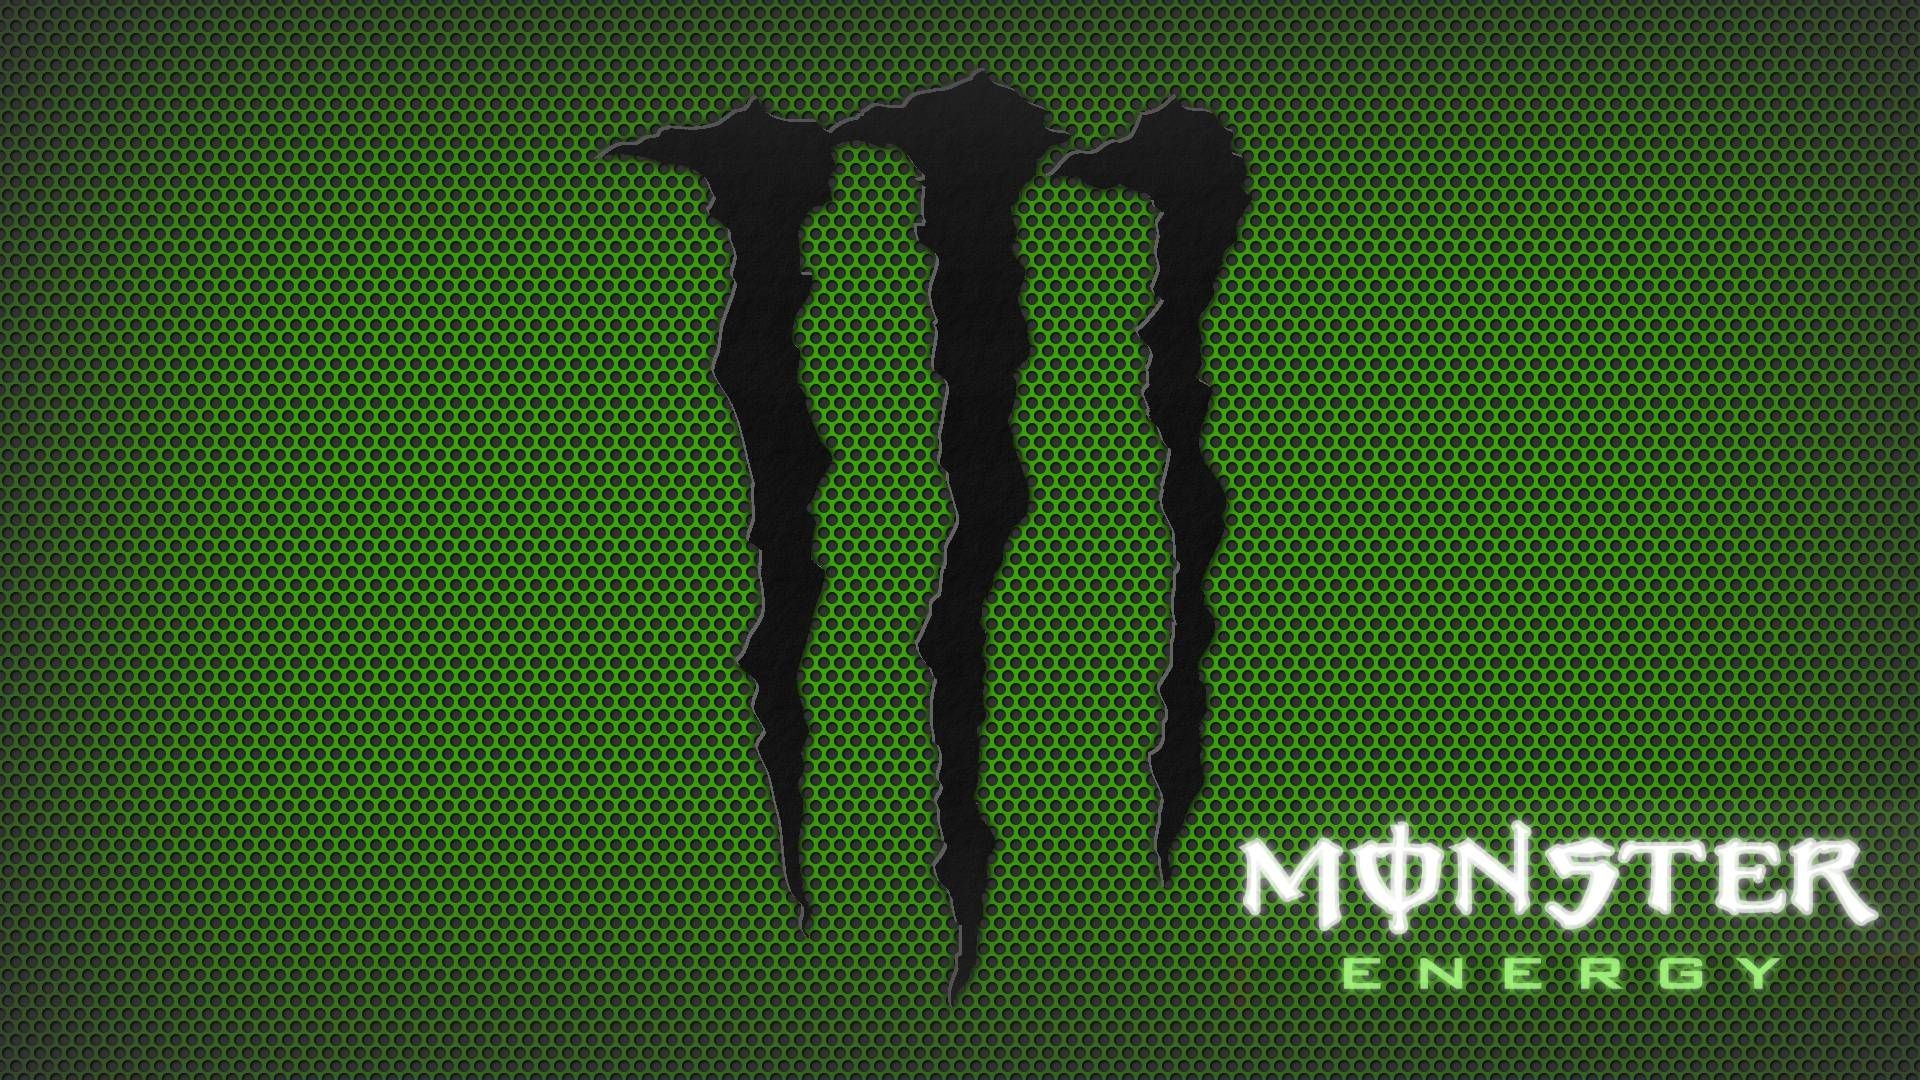 1920x1080 Monster Energy Wallpapers HD - Wallpaper Cave